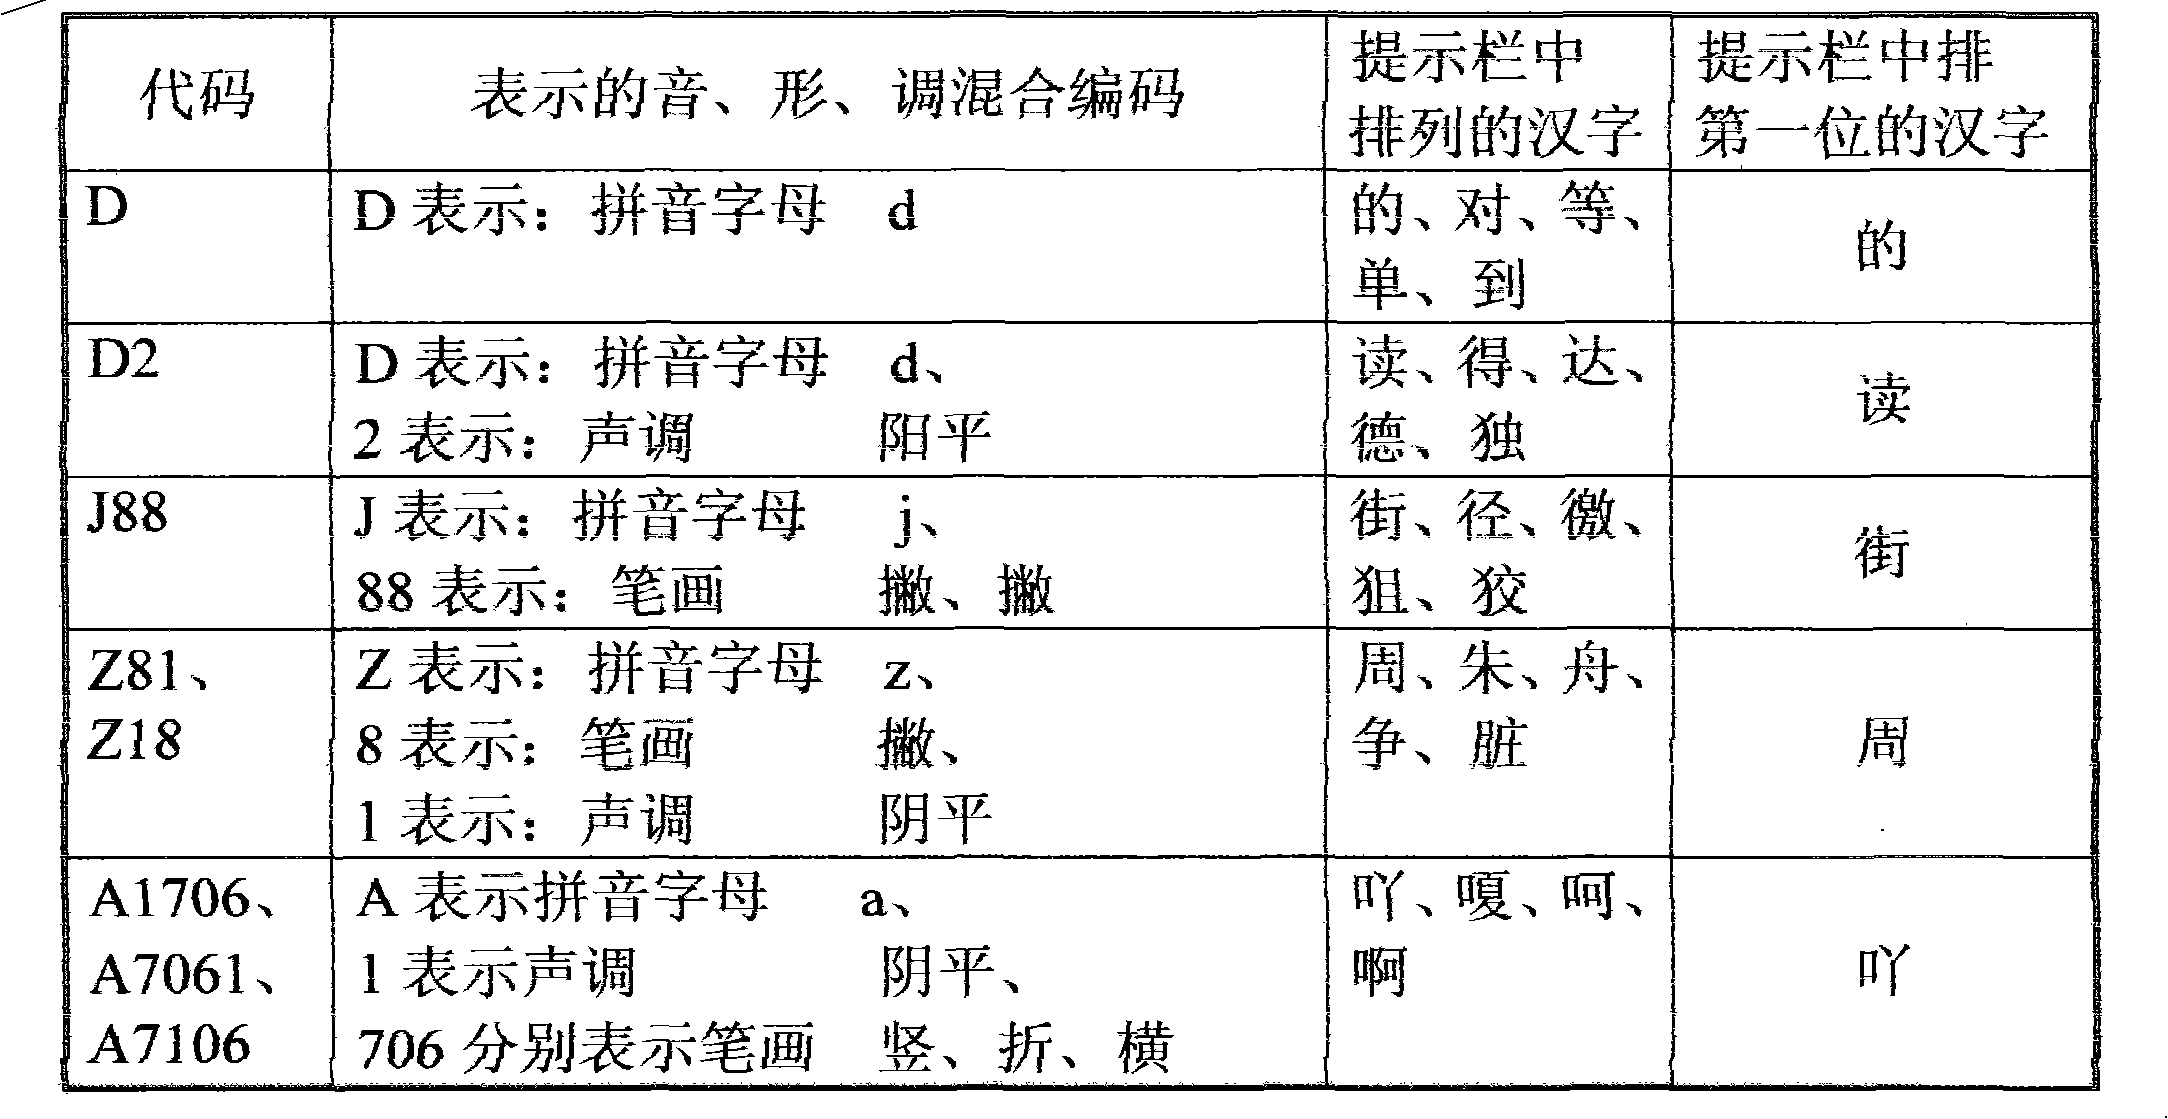 Phonological, calligraphic and tone hybrid coding method for inputting Chinese characters to computer